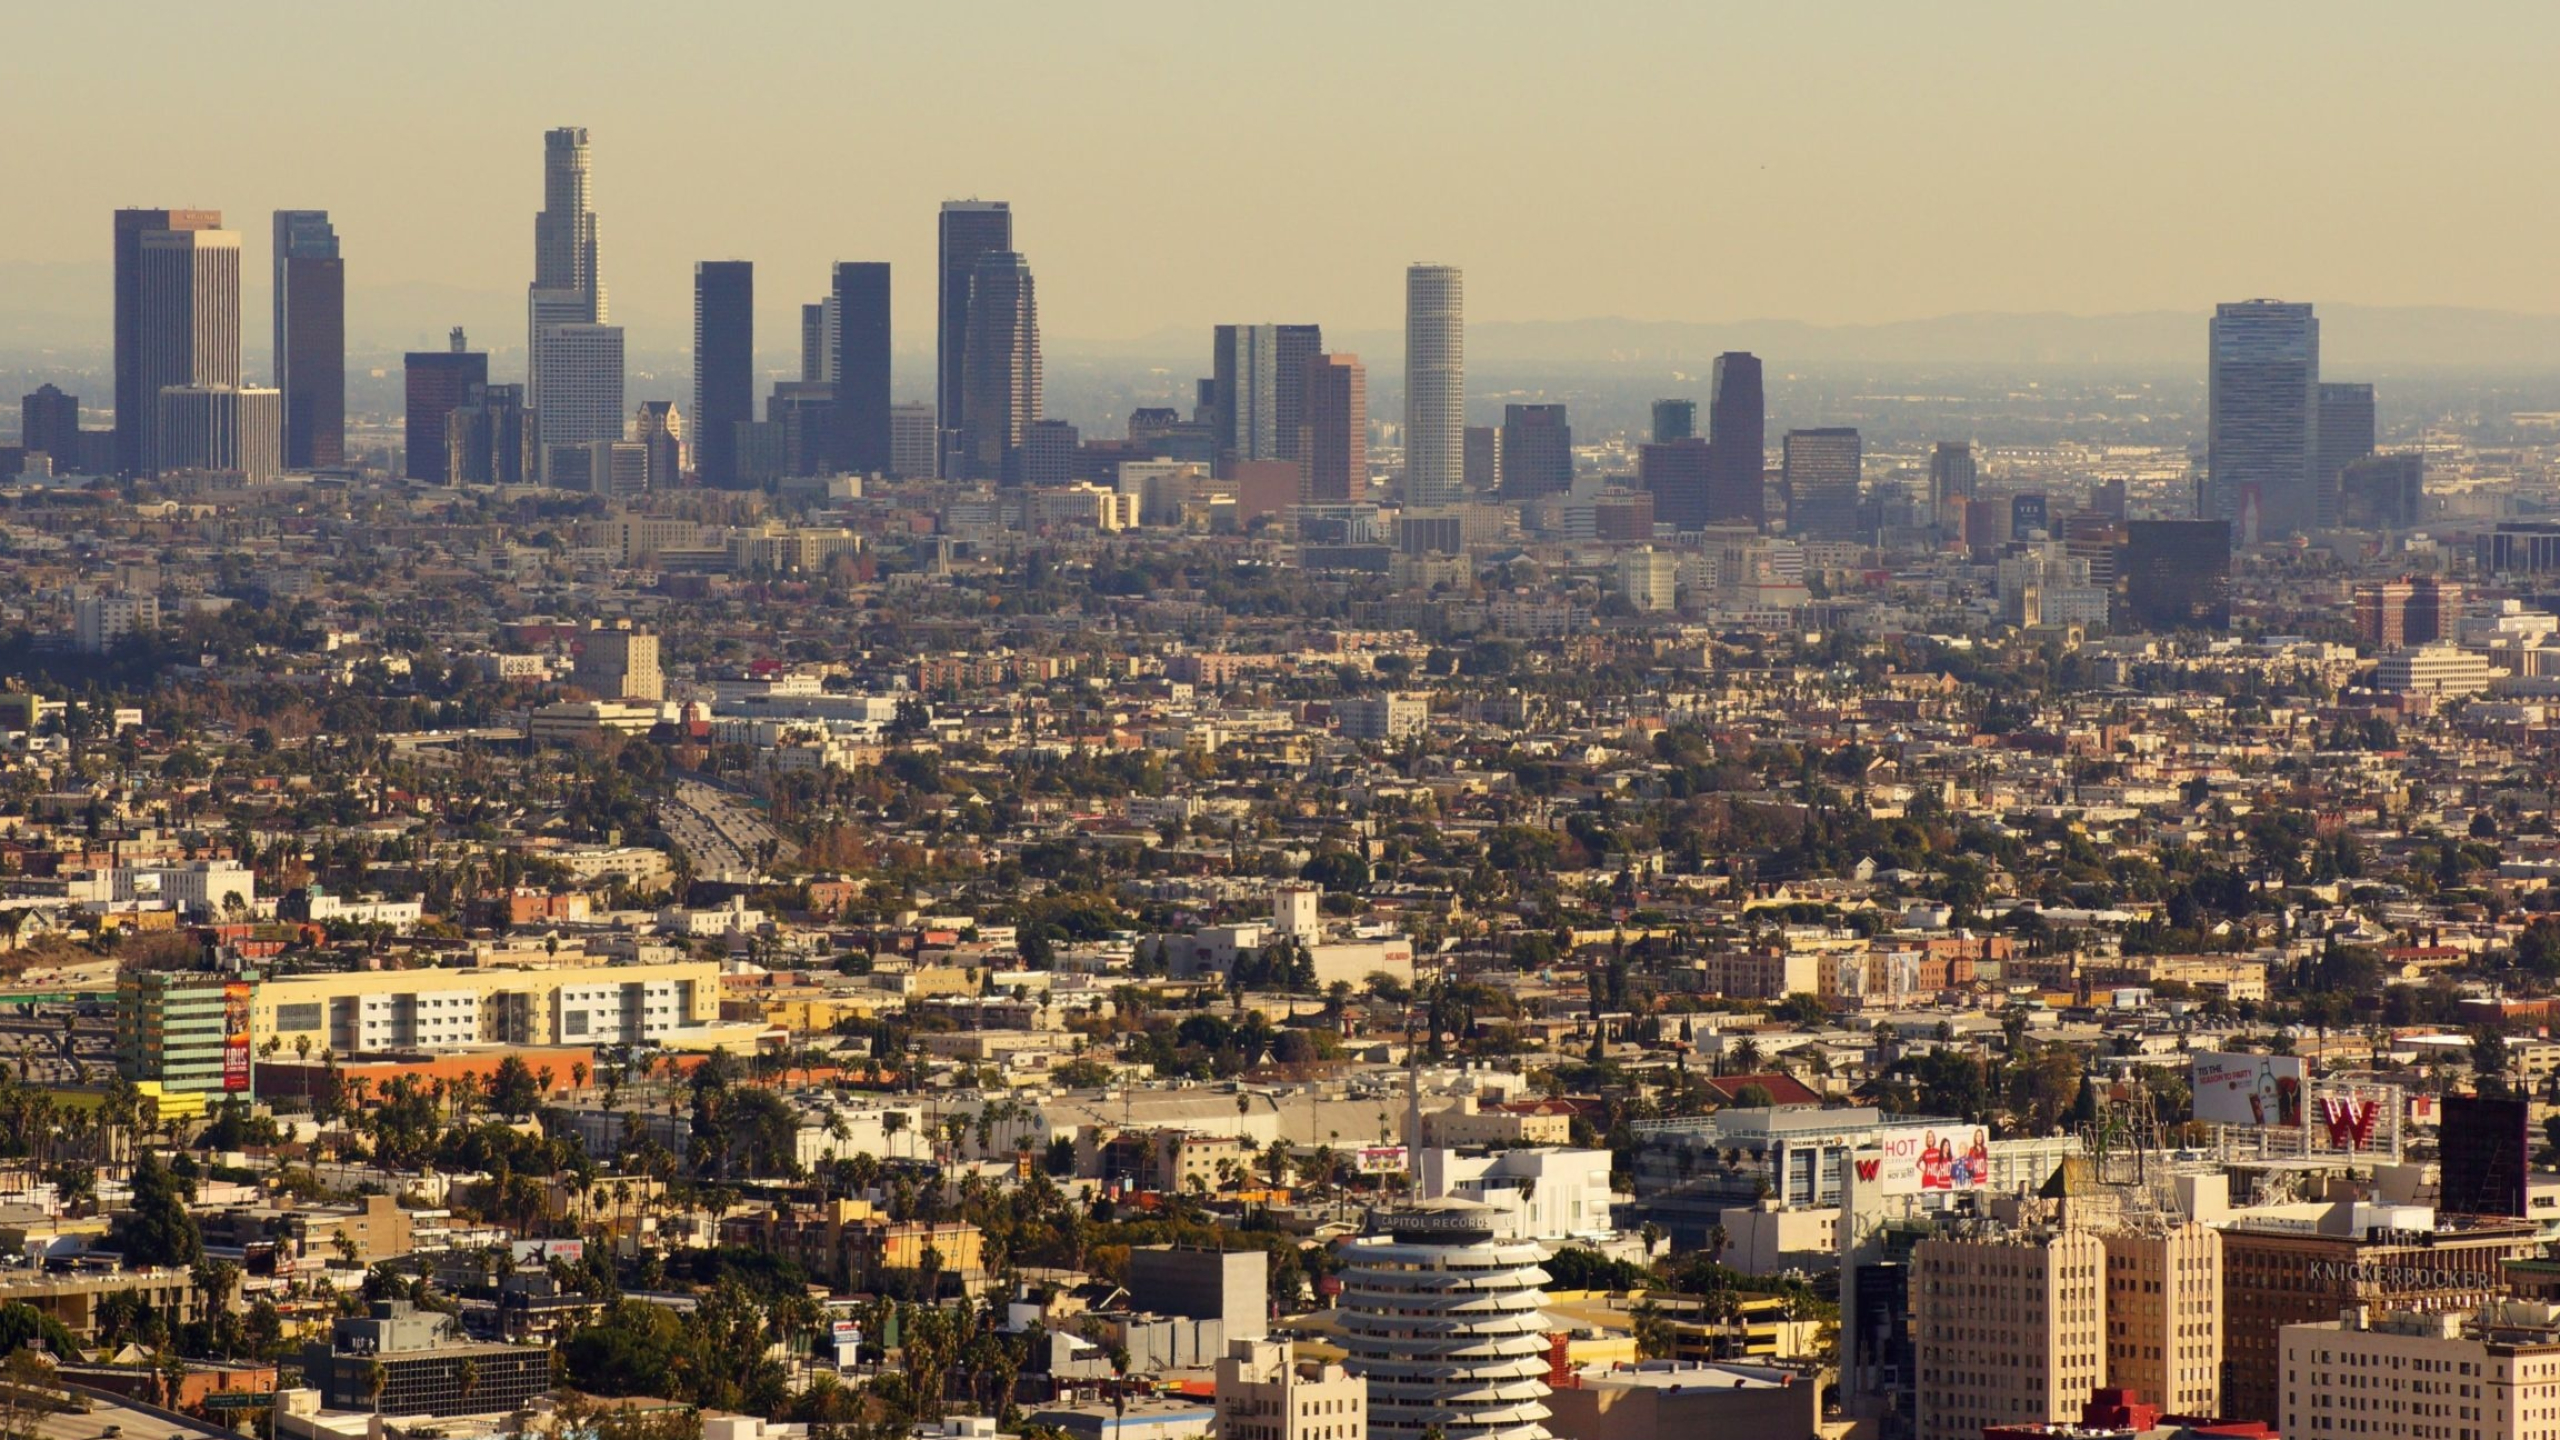 Los Angeles: An important center of culture, medicine, agriculture, business, finance, energy, aerospace, science, food processing, media, international trade, and tourism, LA. 2560x1440 HD Background.